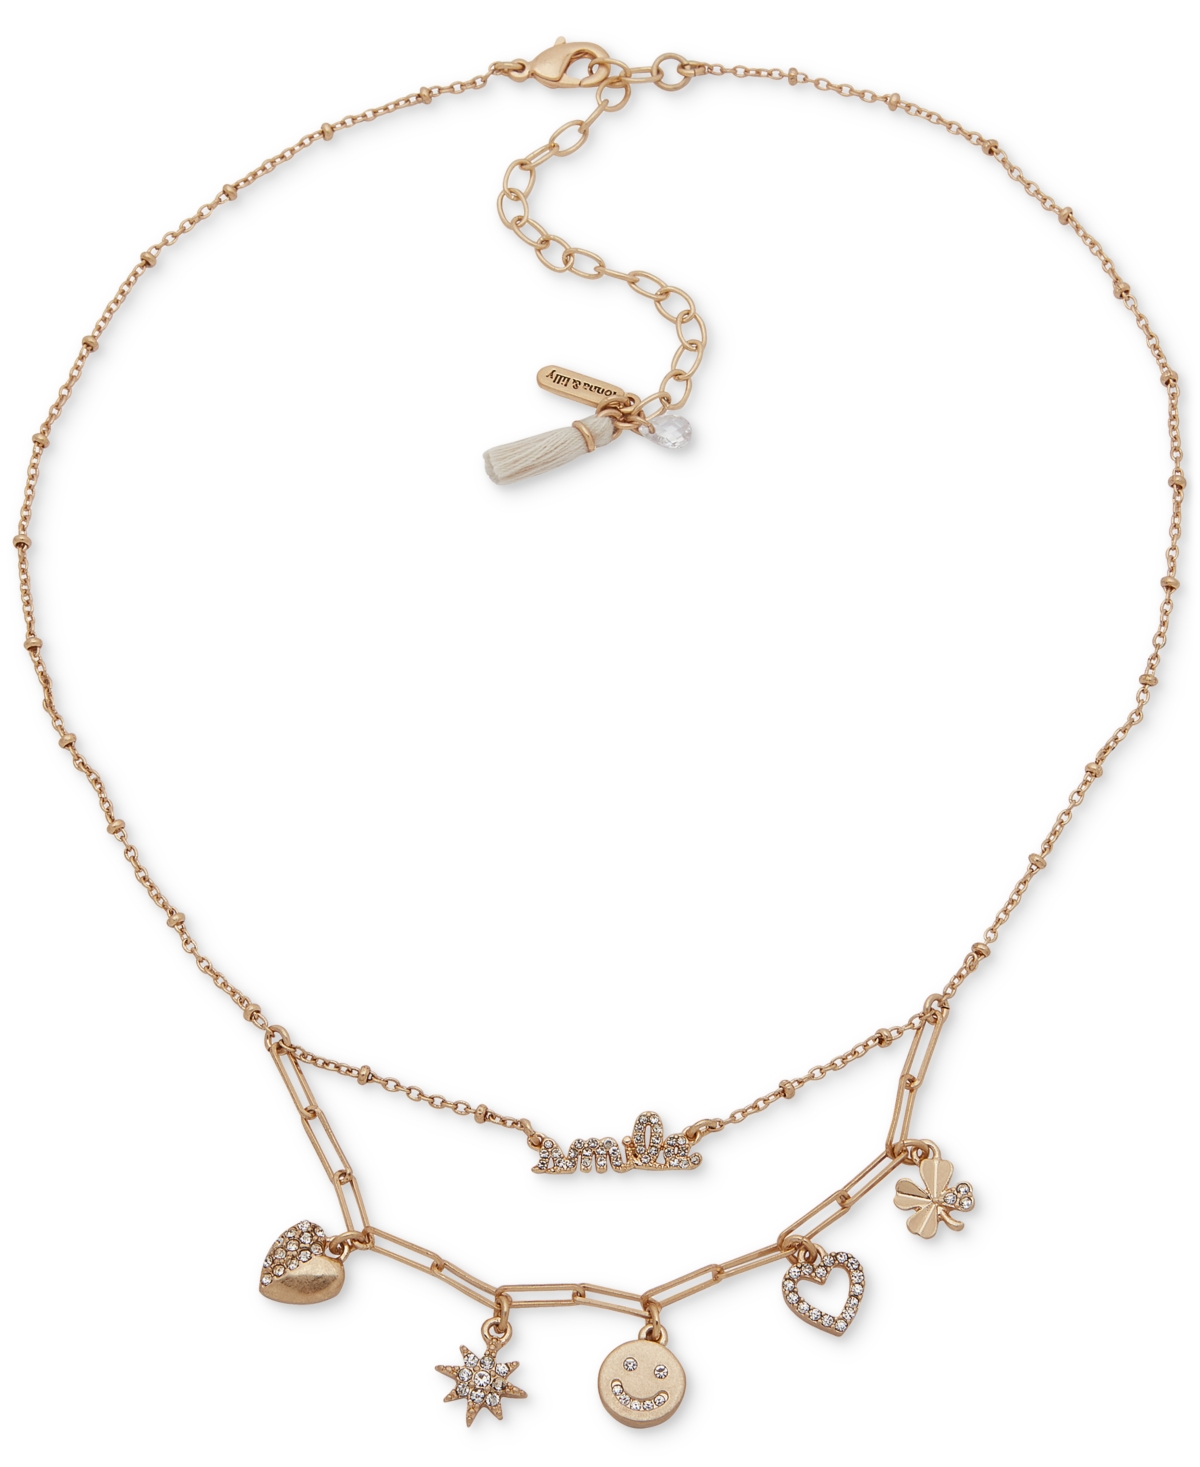 Lonna & Lilly Gold-tone Pave Smile Front Charm Necklace, 16" + 3" Extender In White